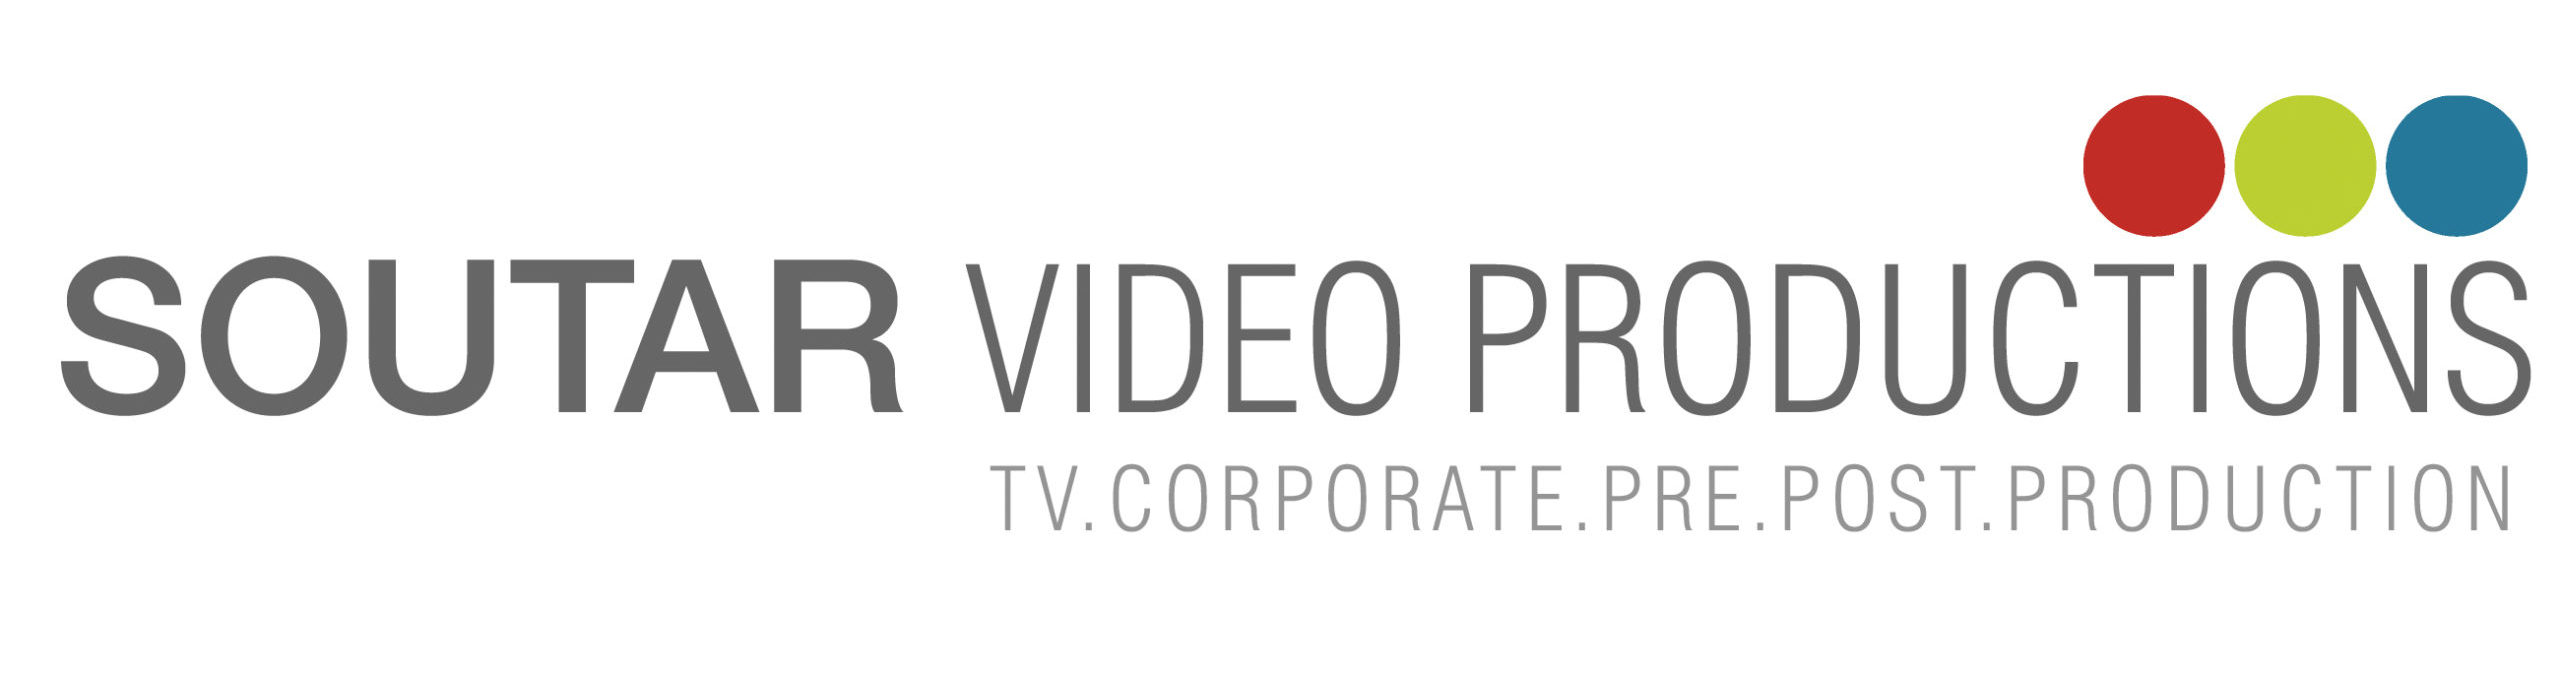 Soutar Video Productions